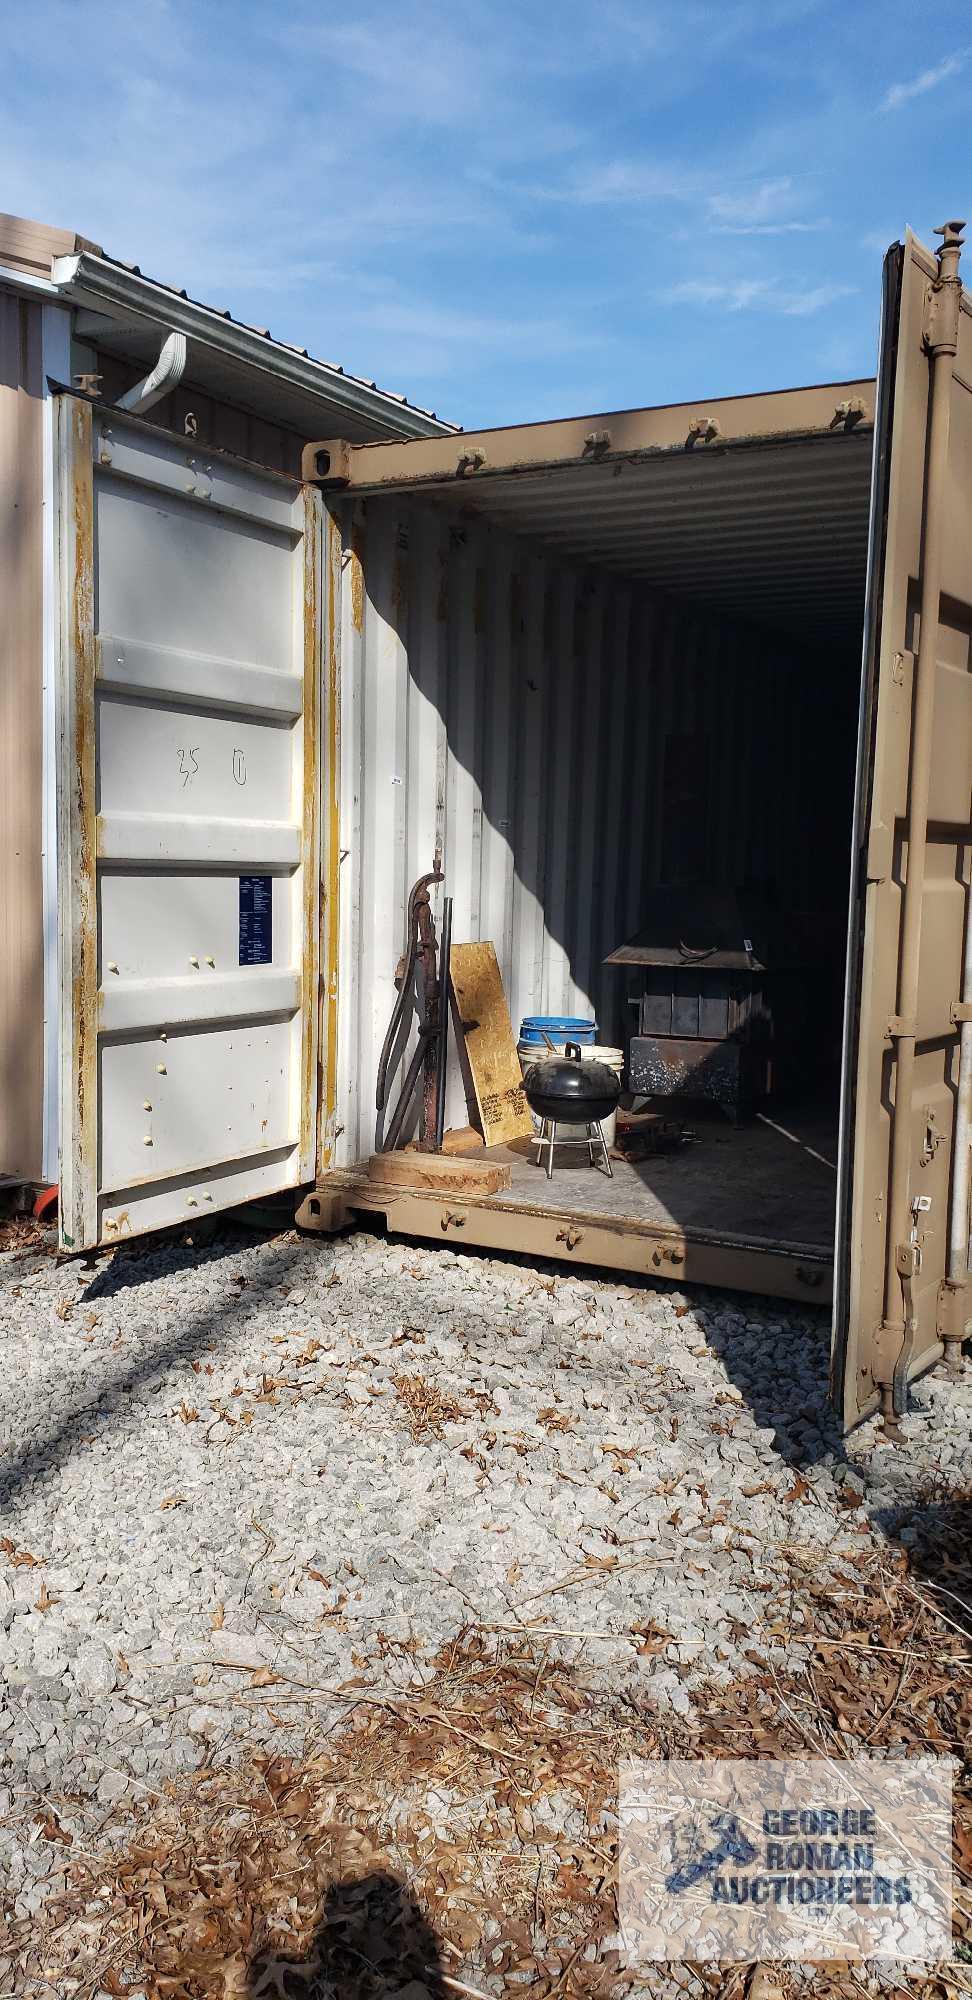 40 foot shipping container. Additional removal time available upon request. Buyer must use our